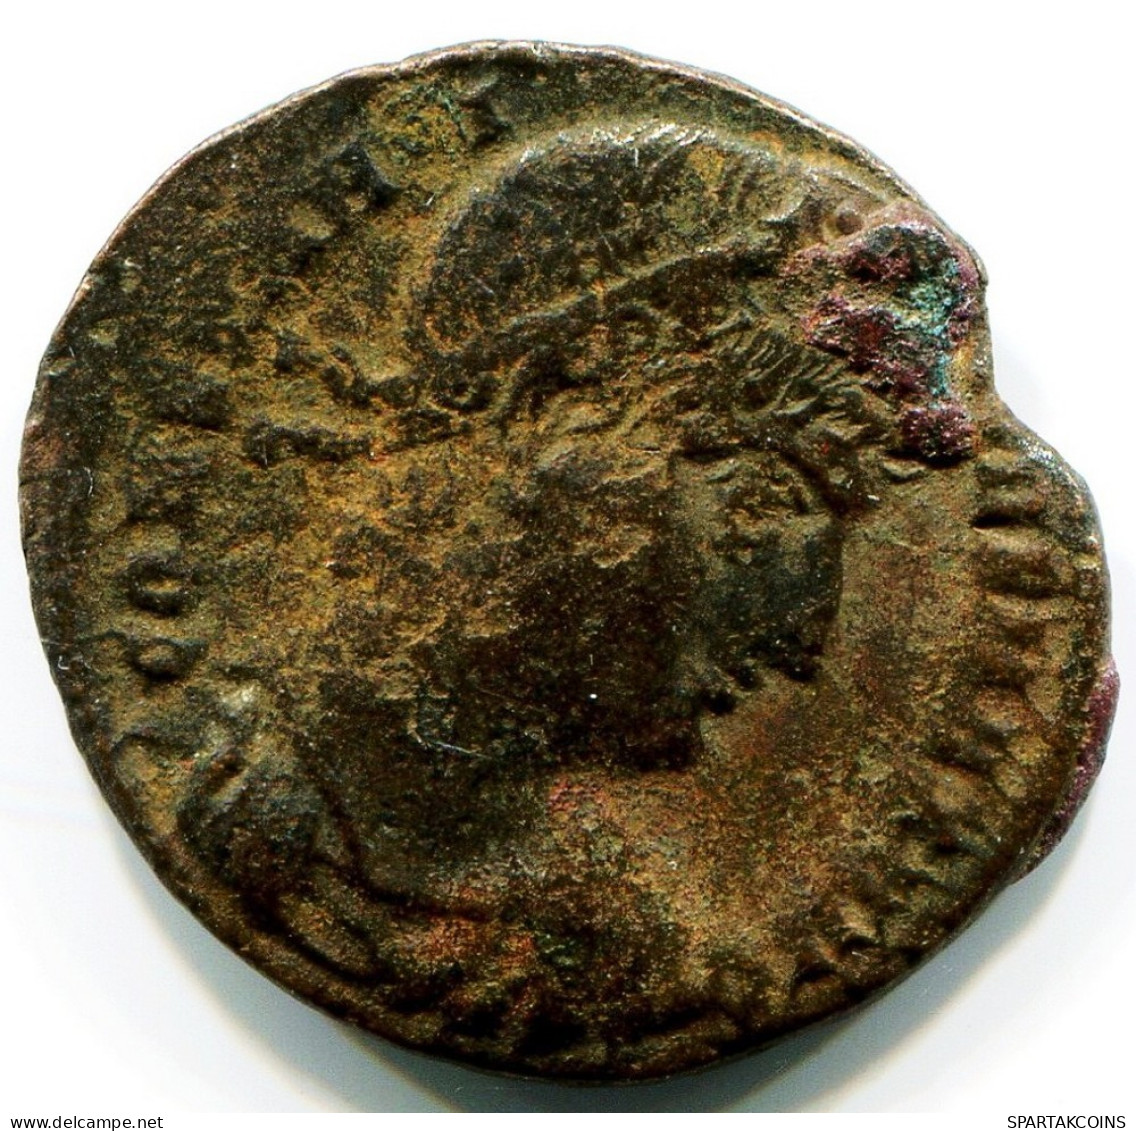 CONSTANTINE I MINTED IN THESSALONICA FOUND IN IHNASYAH HOARD #ANC11130.14.D.A - El Imperio Christiano (307 / 363)